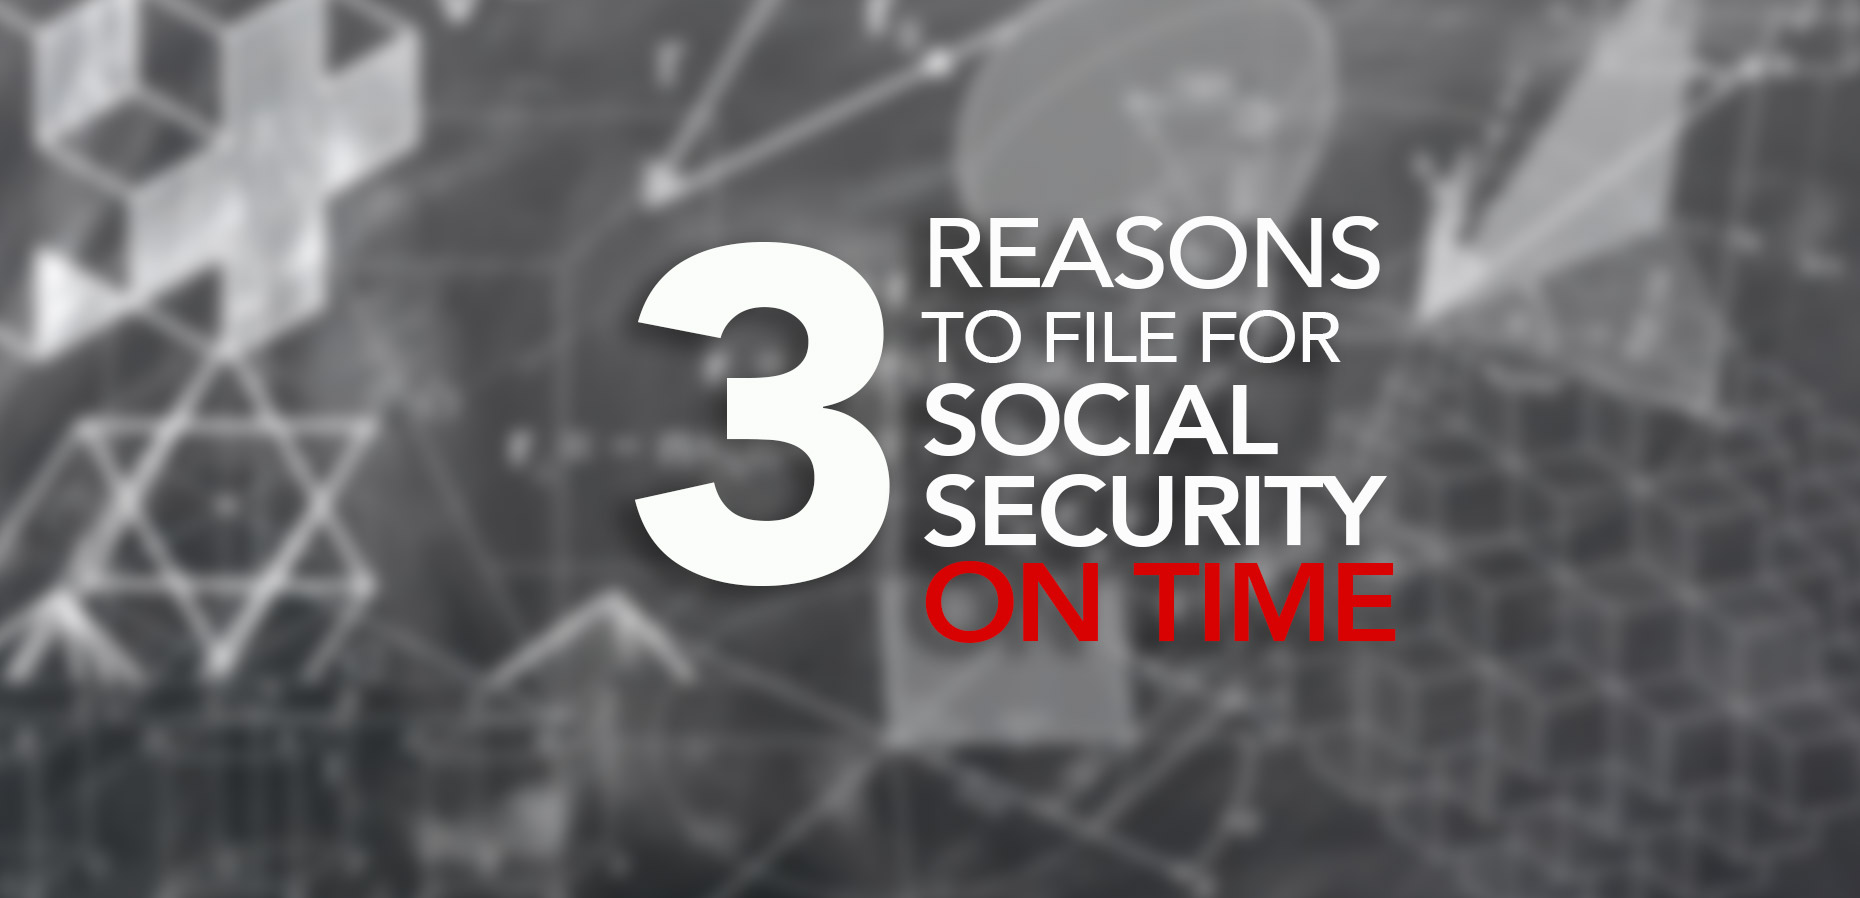 3 Reasons to File for Social Security On Time